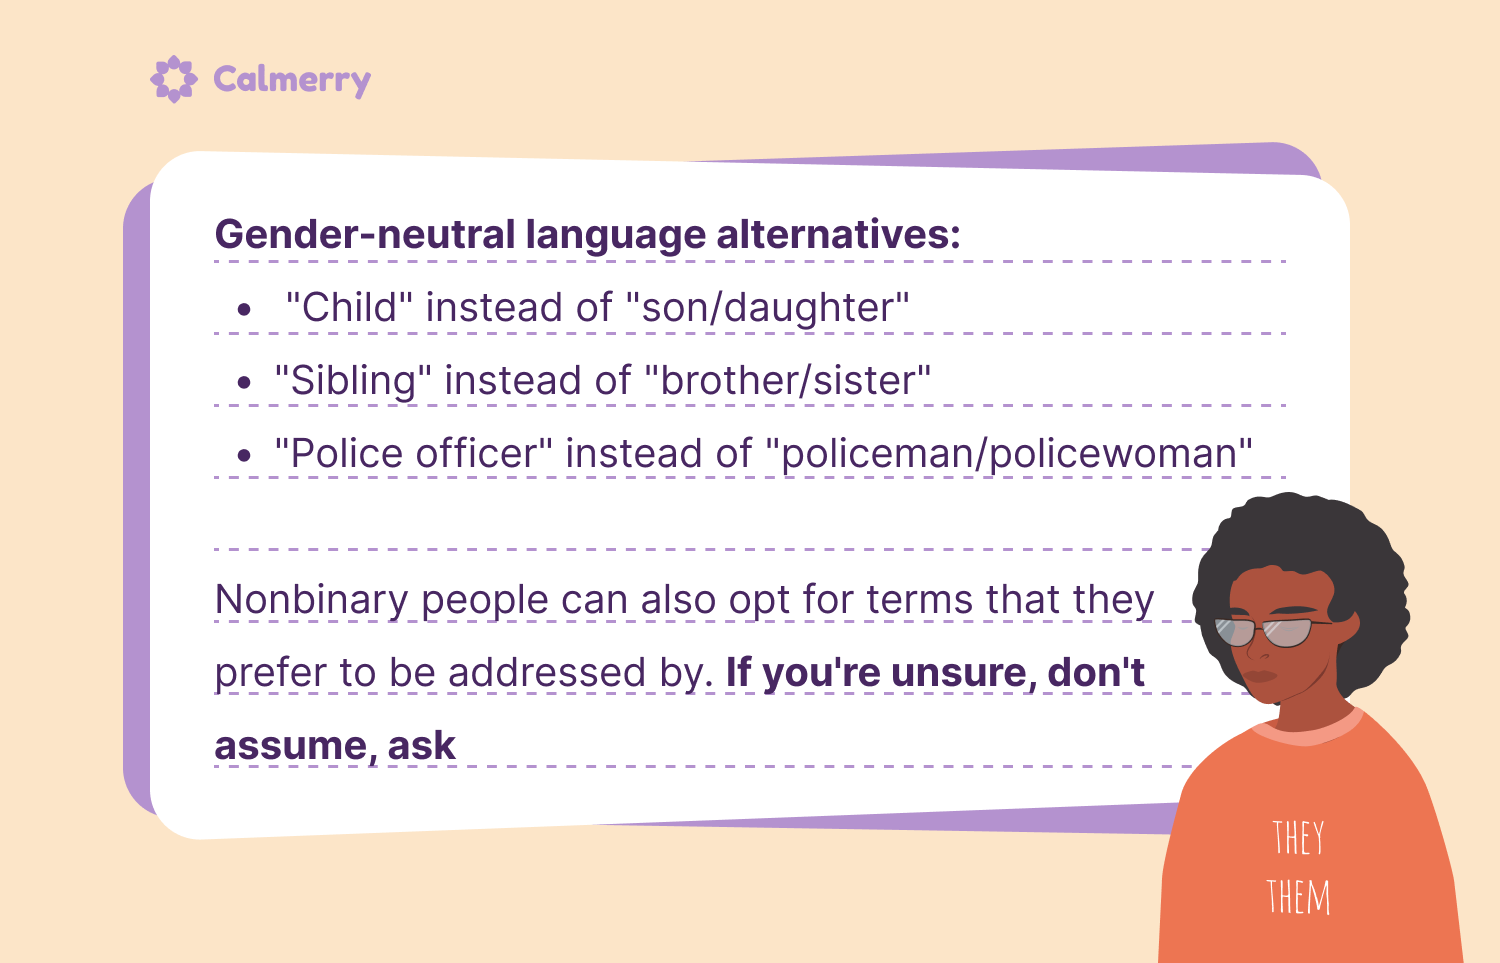 Using gender-neutral language can be more inclusive toward nonbinary people